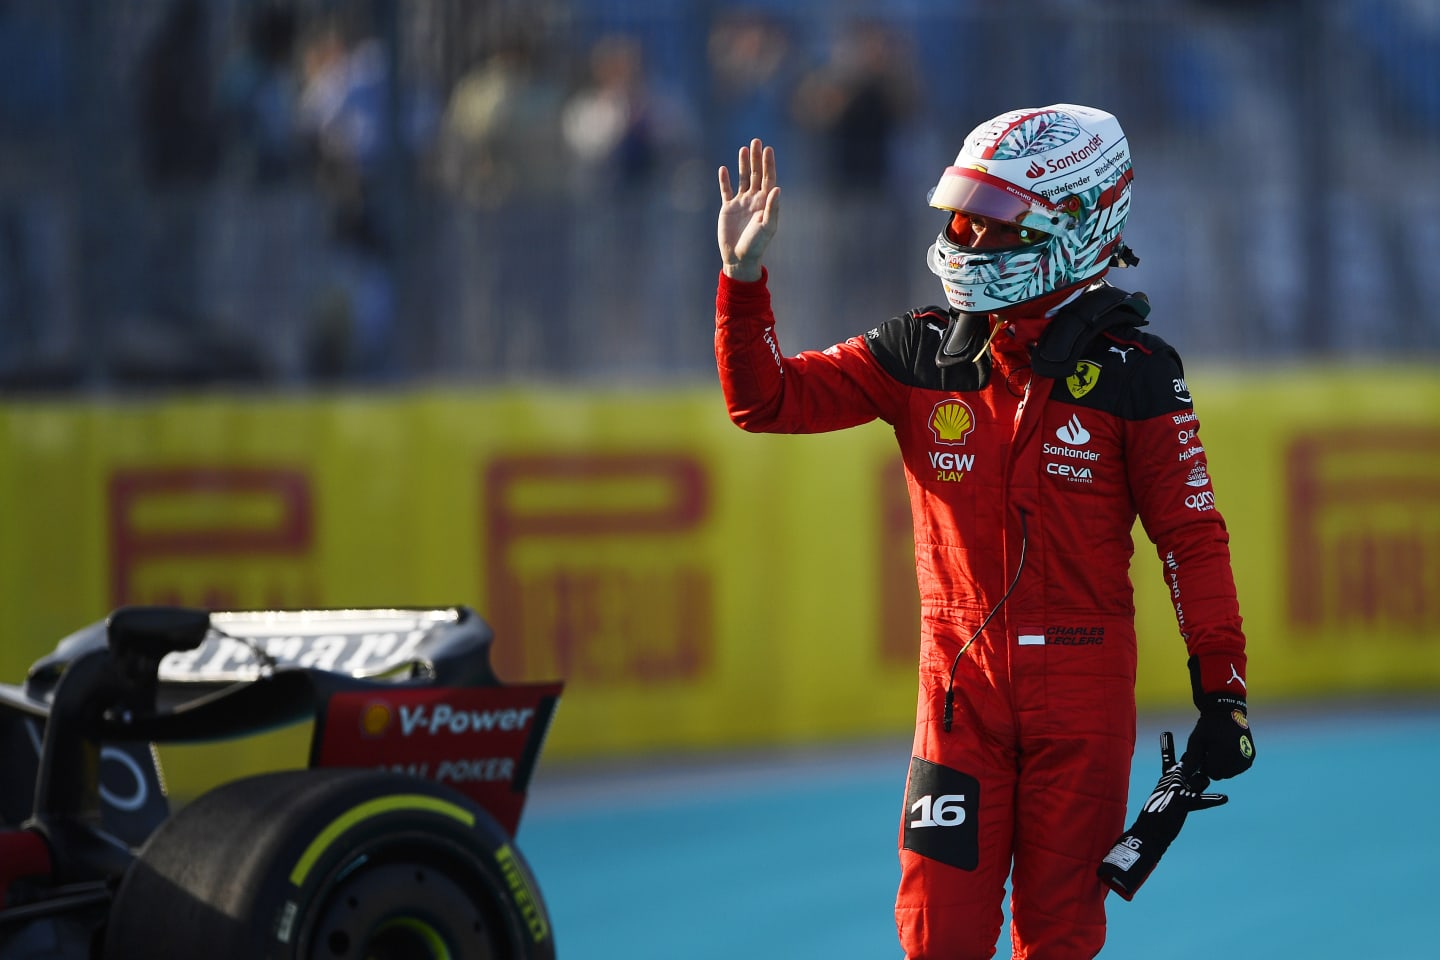 MIAMI, FLORIDA - MAY 05: Charles Leclerc of Monaco and Ferrari waves to the crowd after crashing during practice ahead of the F1 Grand Prix of Miami at Miami International Autodrome on May 05, 2023 in Miami, Florida. (Photo by Rudy Carezzevoli/Getty Images)